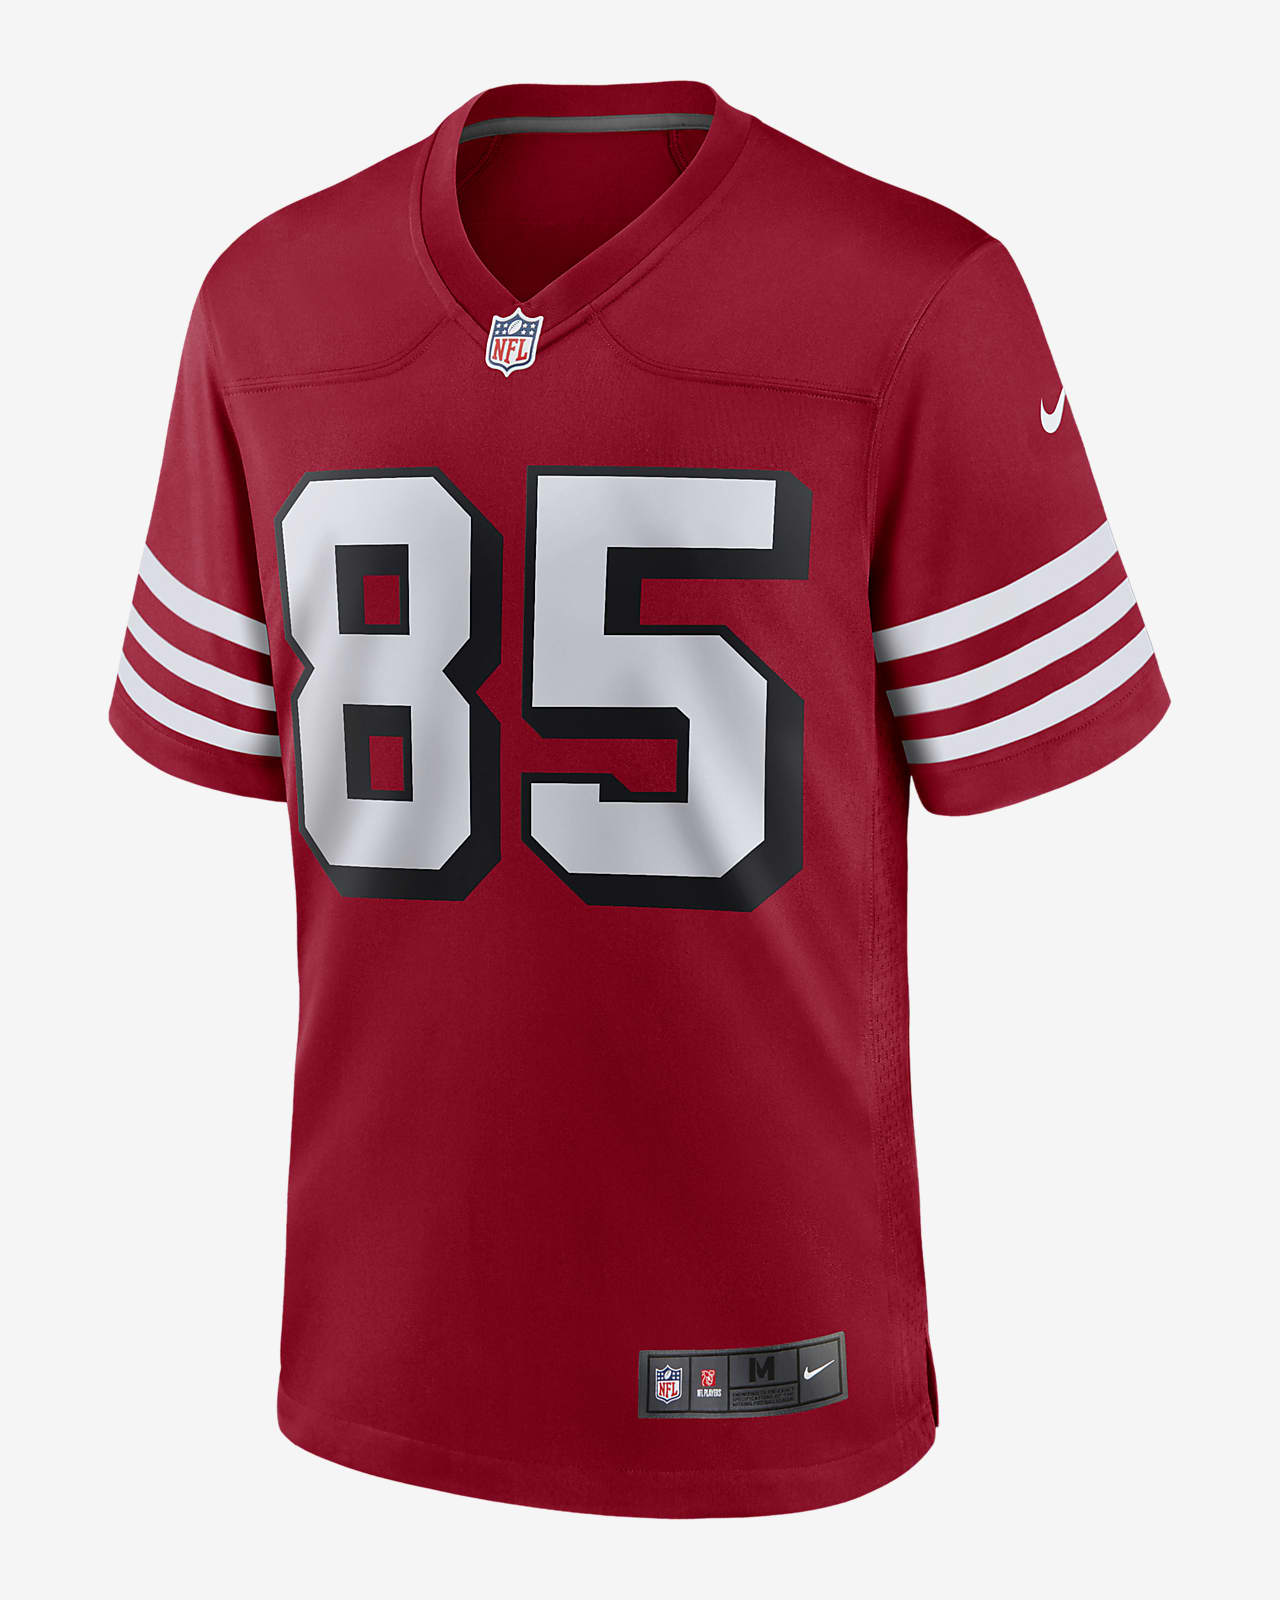 official kittle jersey